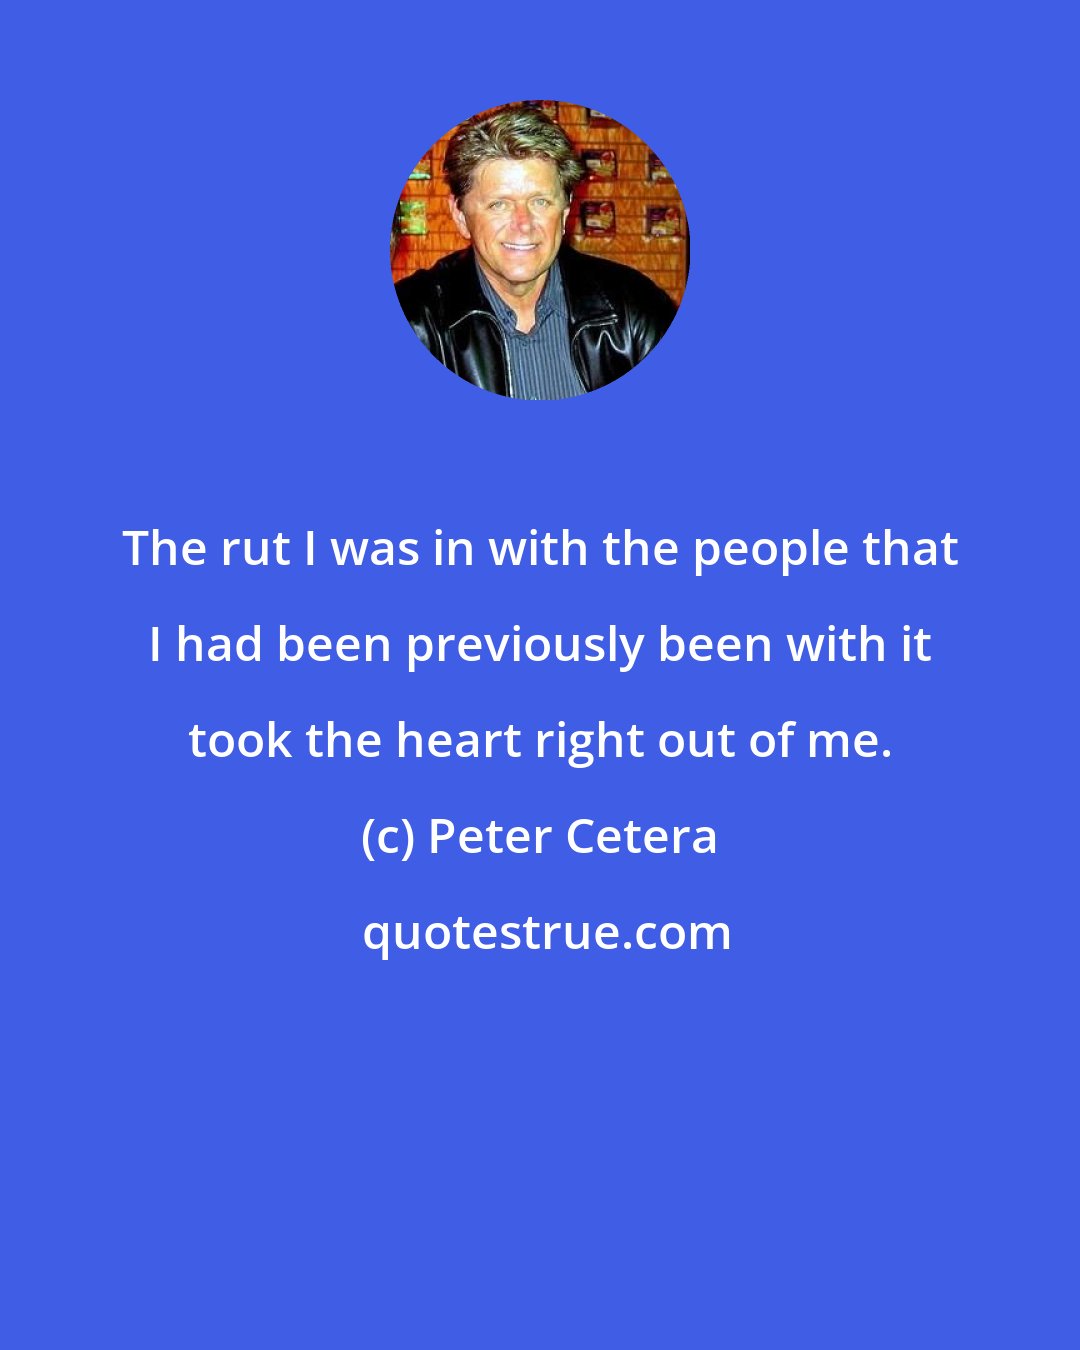 Peter Cetera: The rut I was in with the people that I had been previously been with it took the heart right out of me.